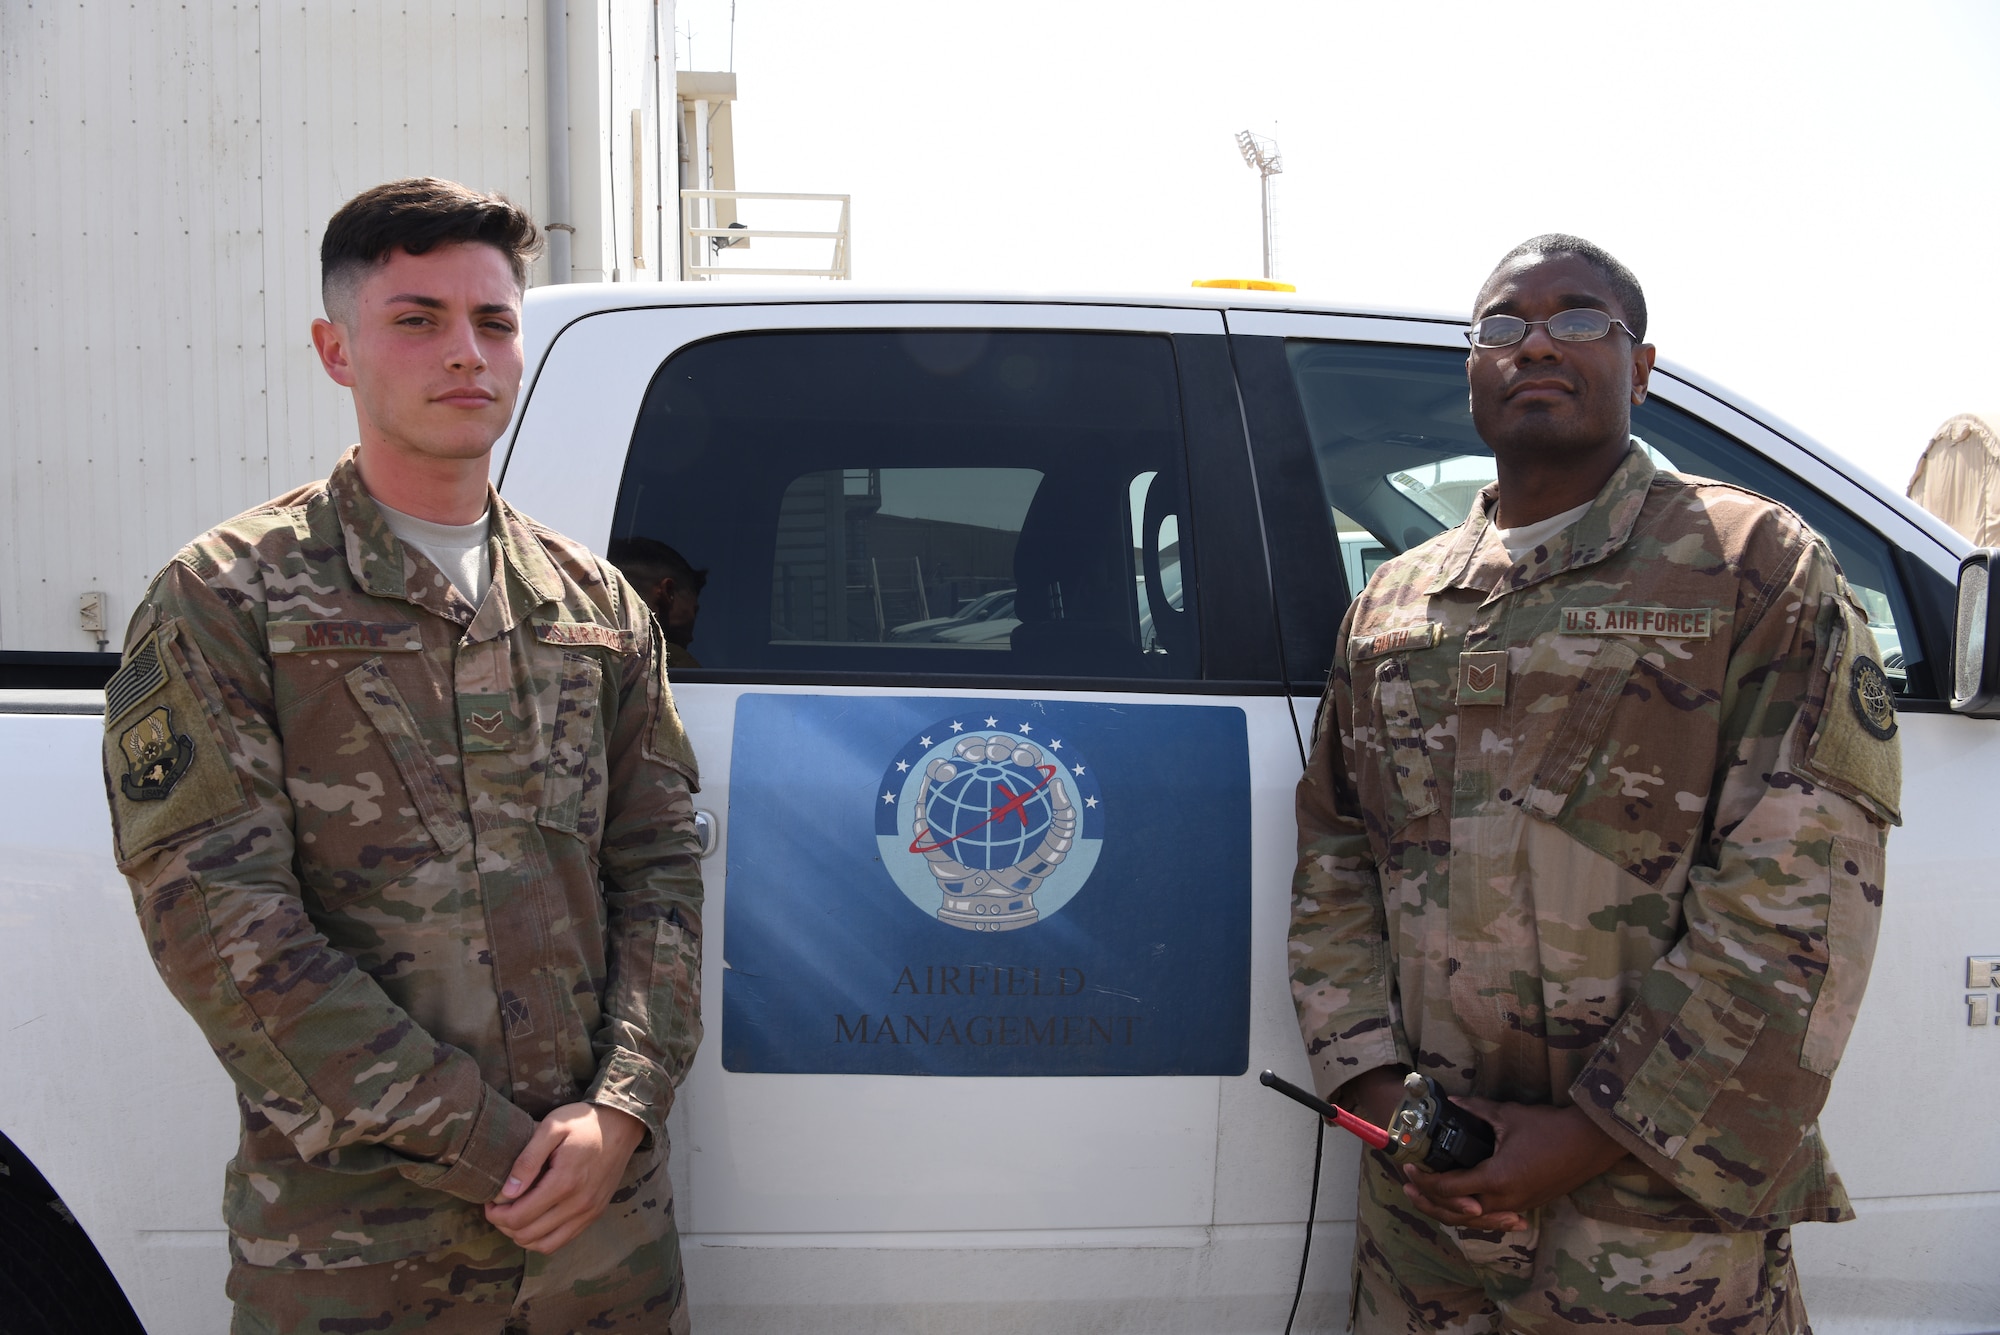 Airman 1st Class Jesse Meraz, 380th Expeditionary Operational Support Squadron airfield management operations coordinator and Tech. Sgt. Antwan Smith, 380th EOSS NCOIC of airfield management, pose for a photo at Al Dhafra Air Base, United Arab Emirates, Feb. 26, 2019.